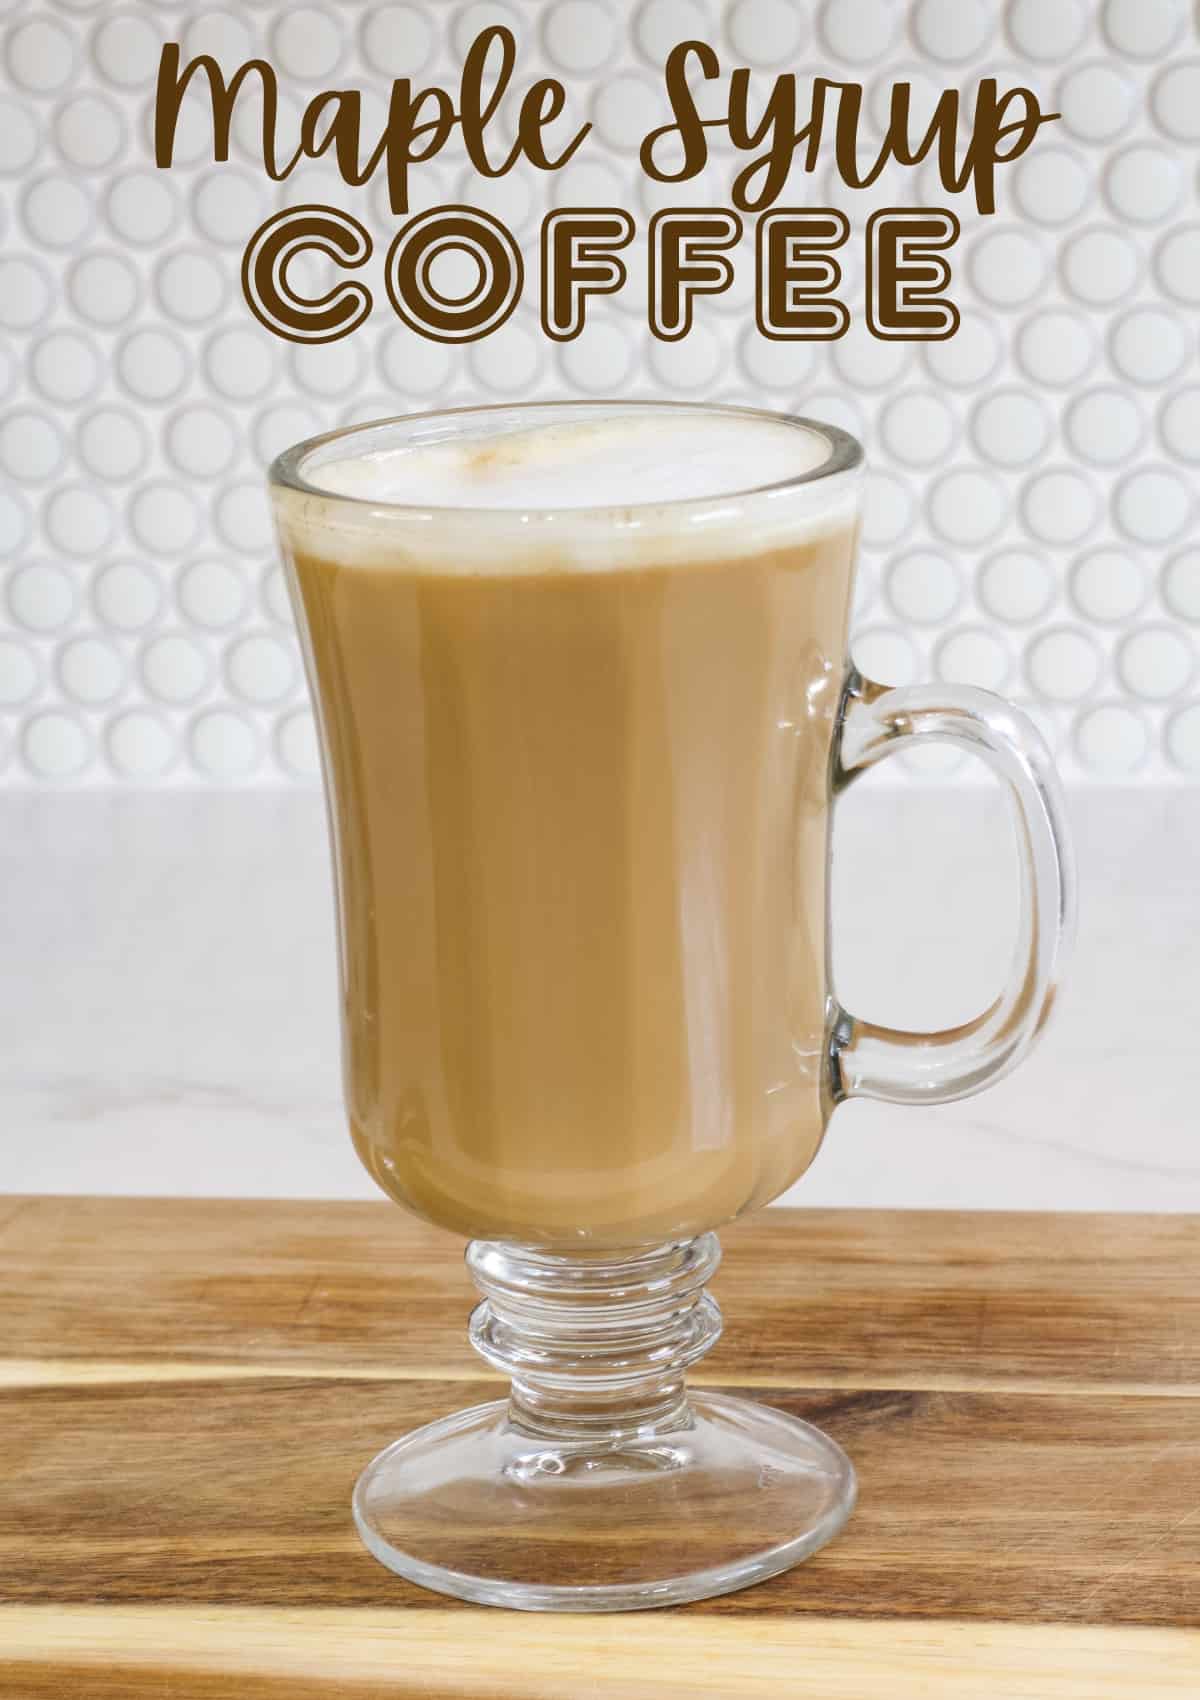 https://www.mindyscookingobsession.com/wp-content/uploads/2023/03/Maple-Syrup-coffee-1.jpg